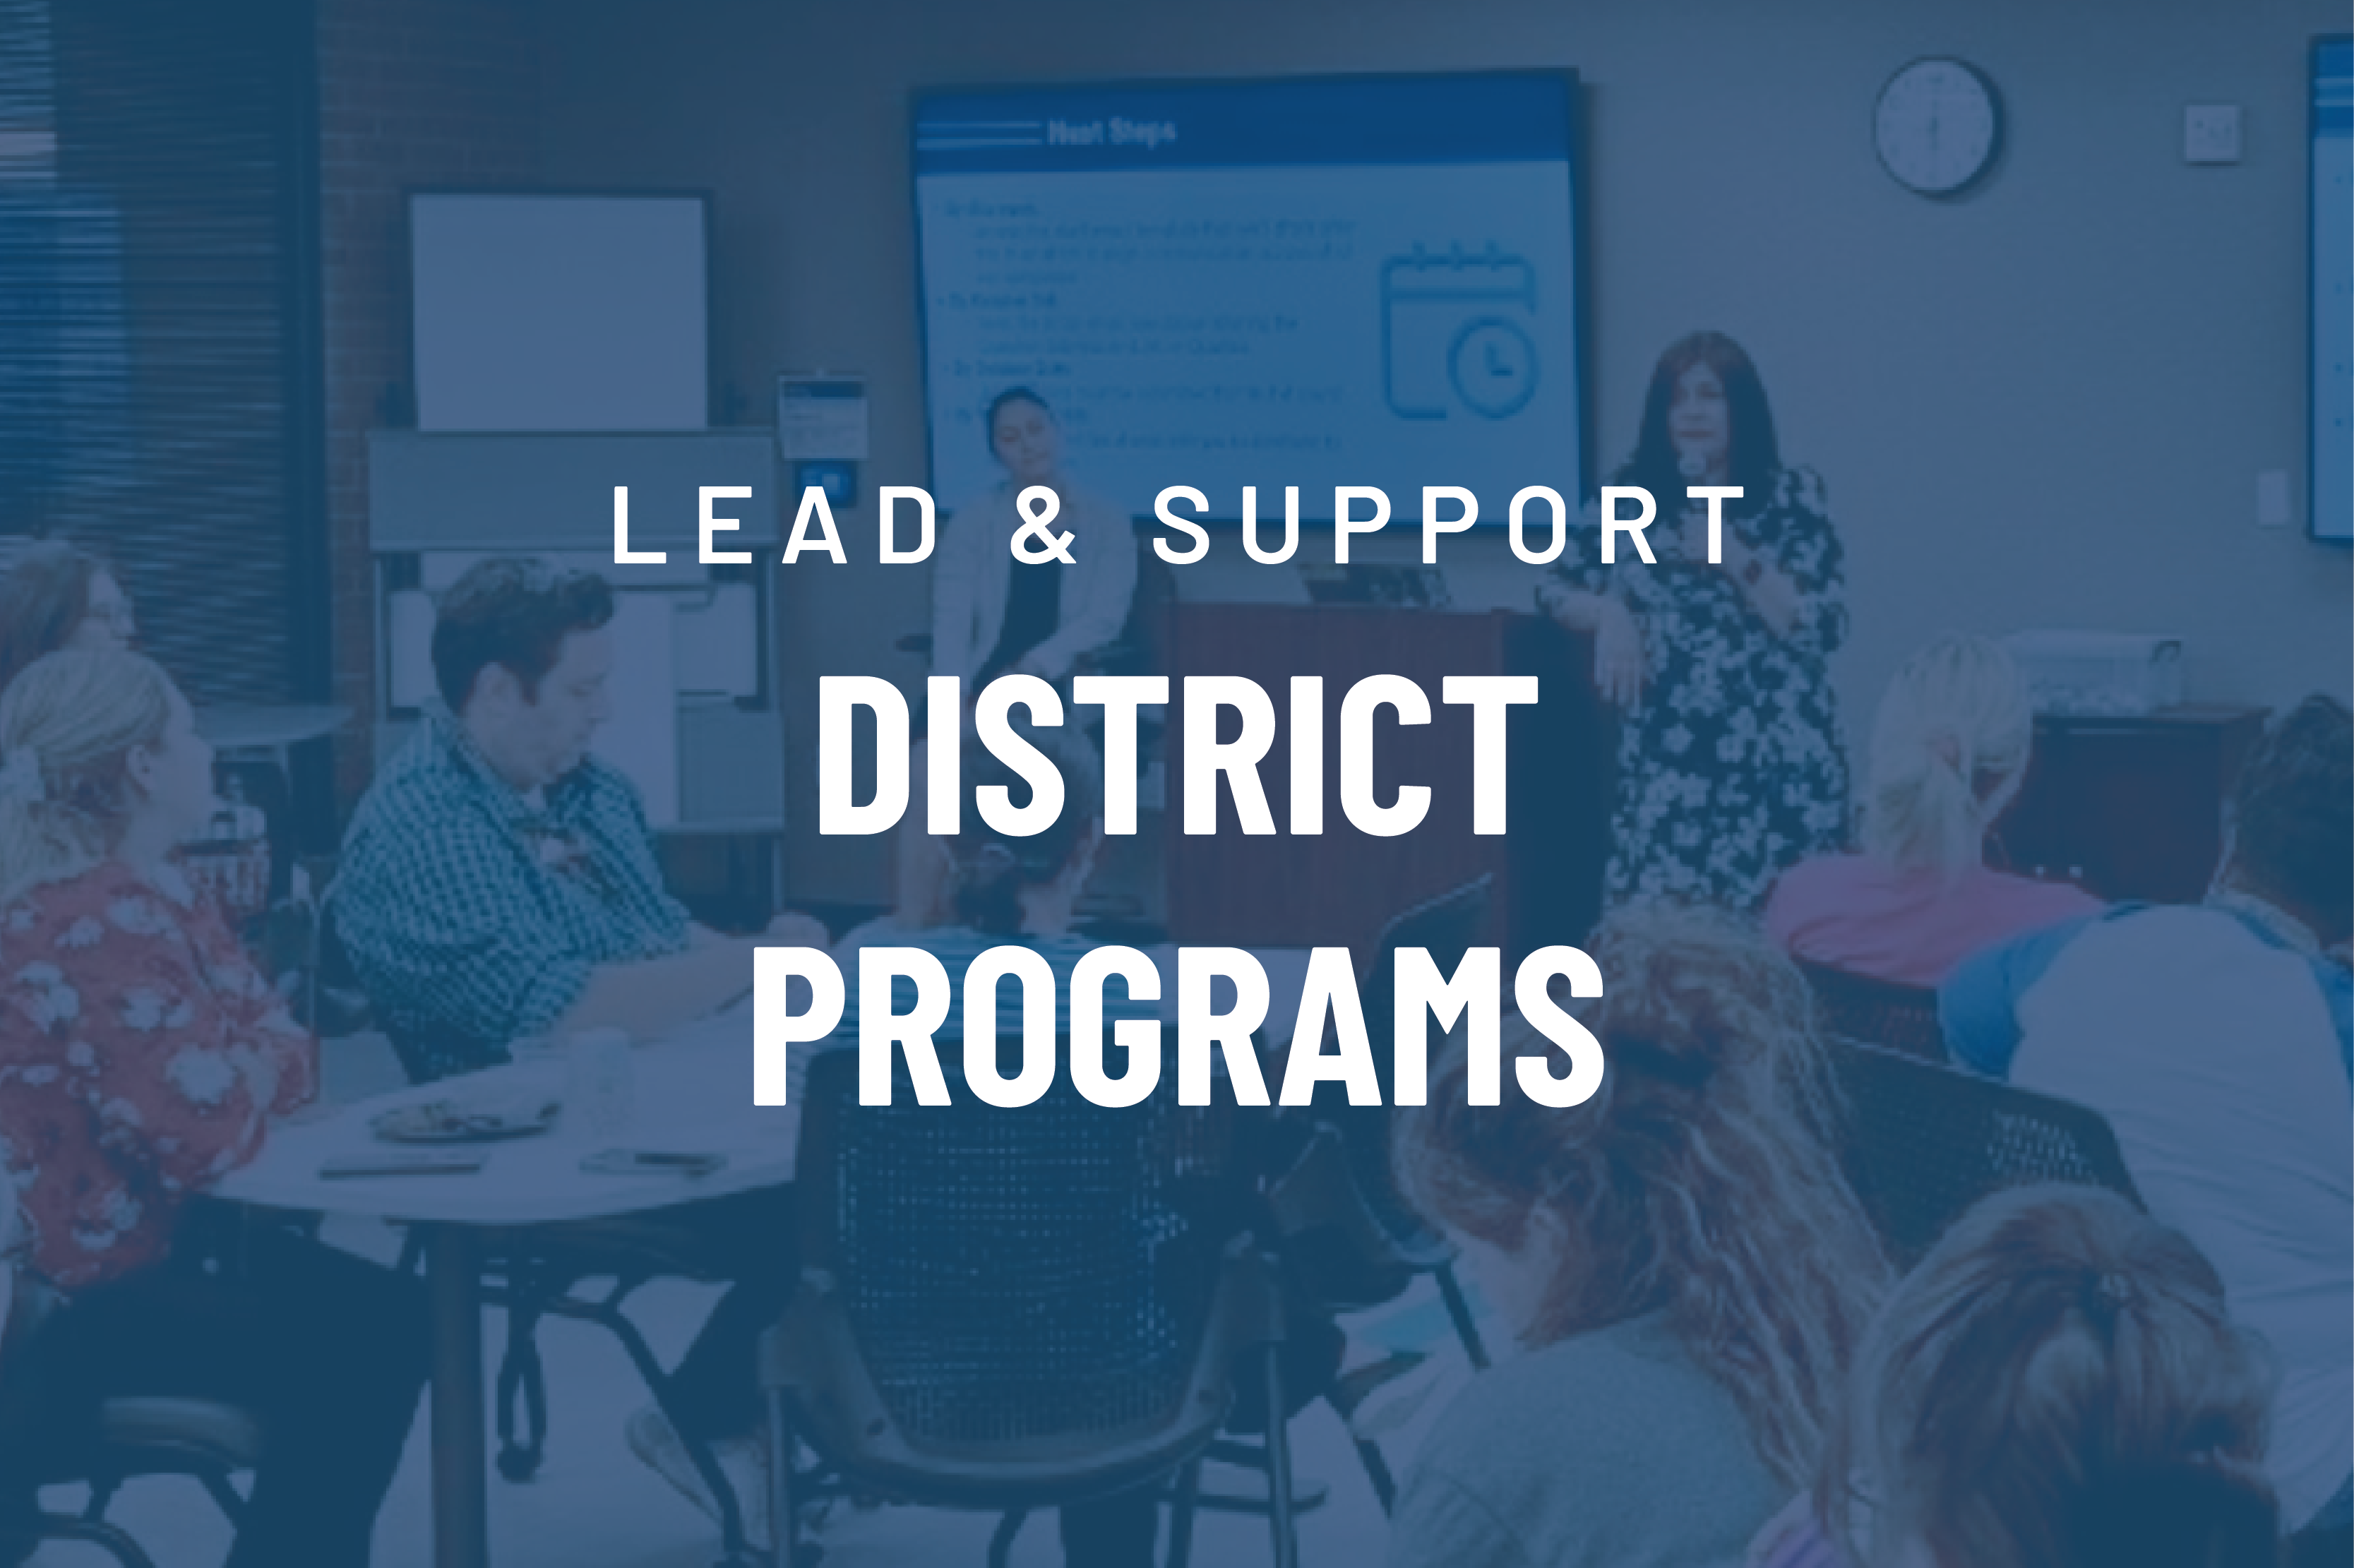 Lead & Support - District Programs